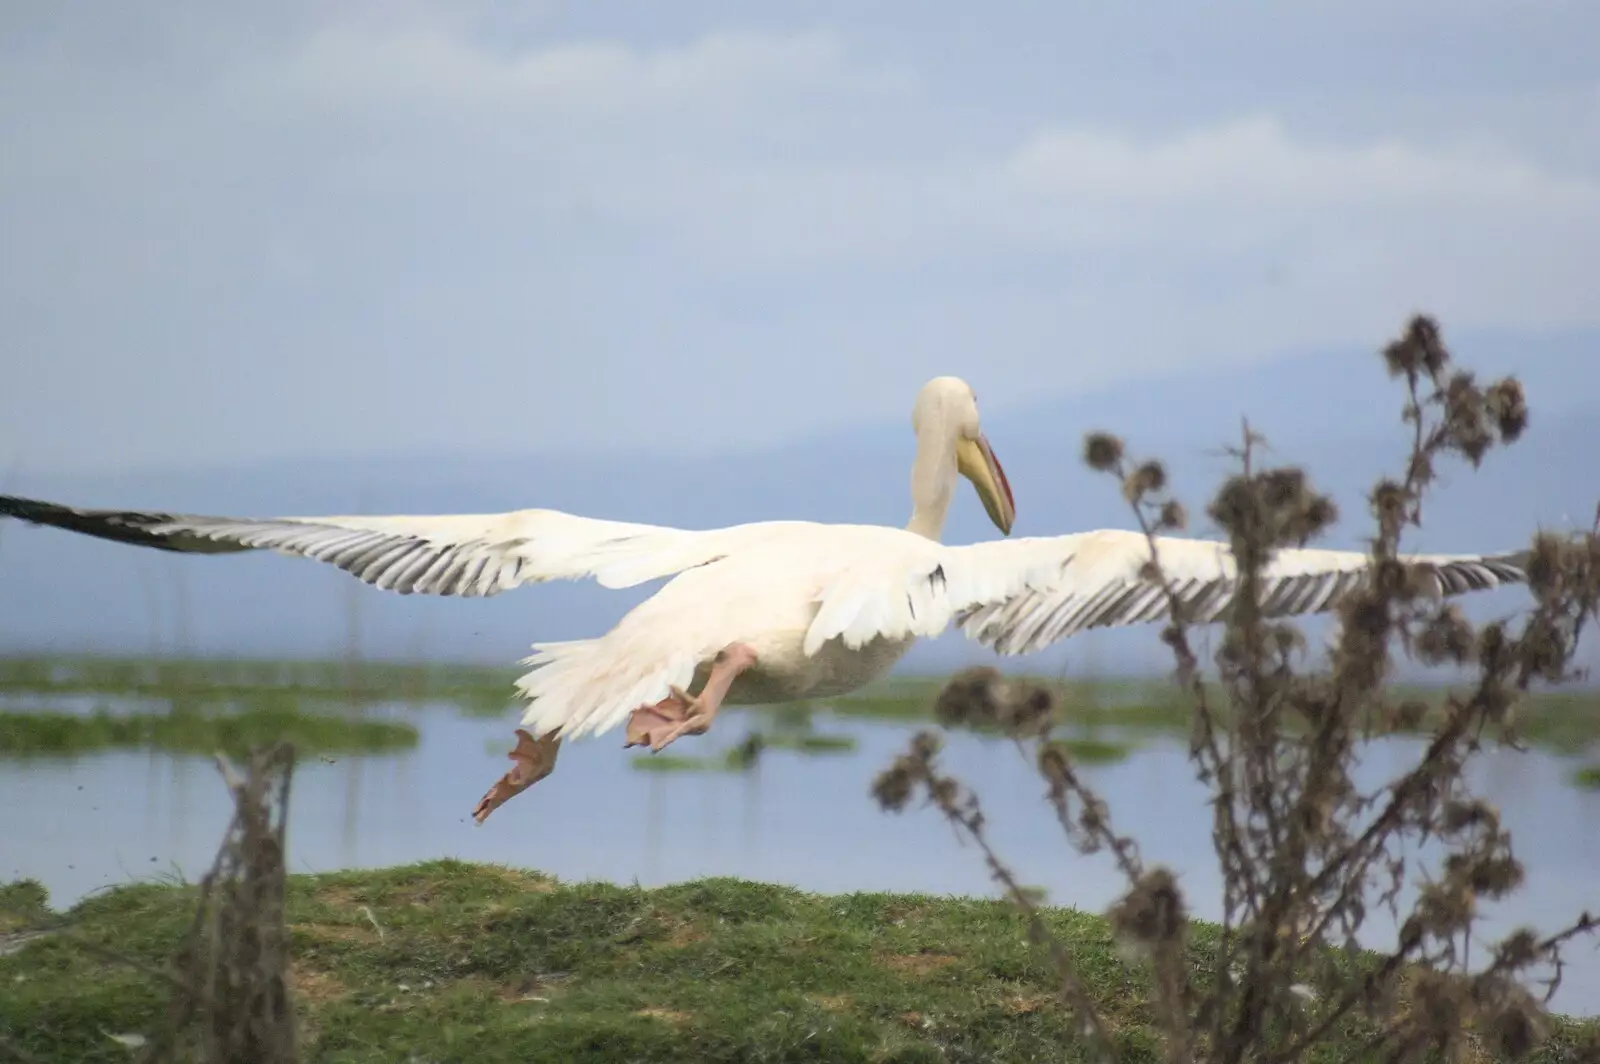 A pelican takes to the air, from Narok to Naivasha and Hell's Gate National Park, Kenya, Africa - 5th November 2010